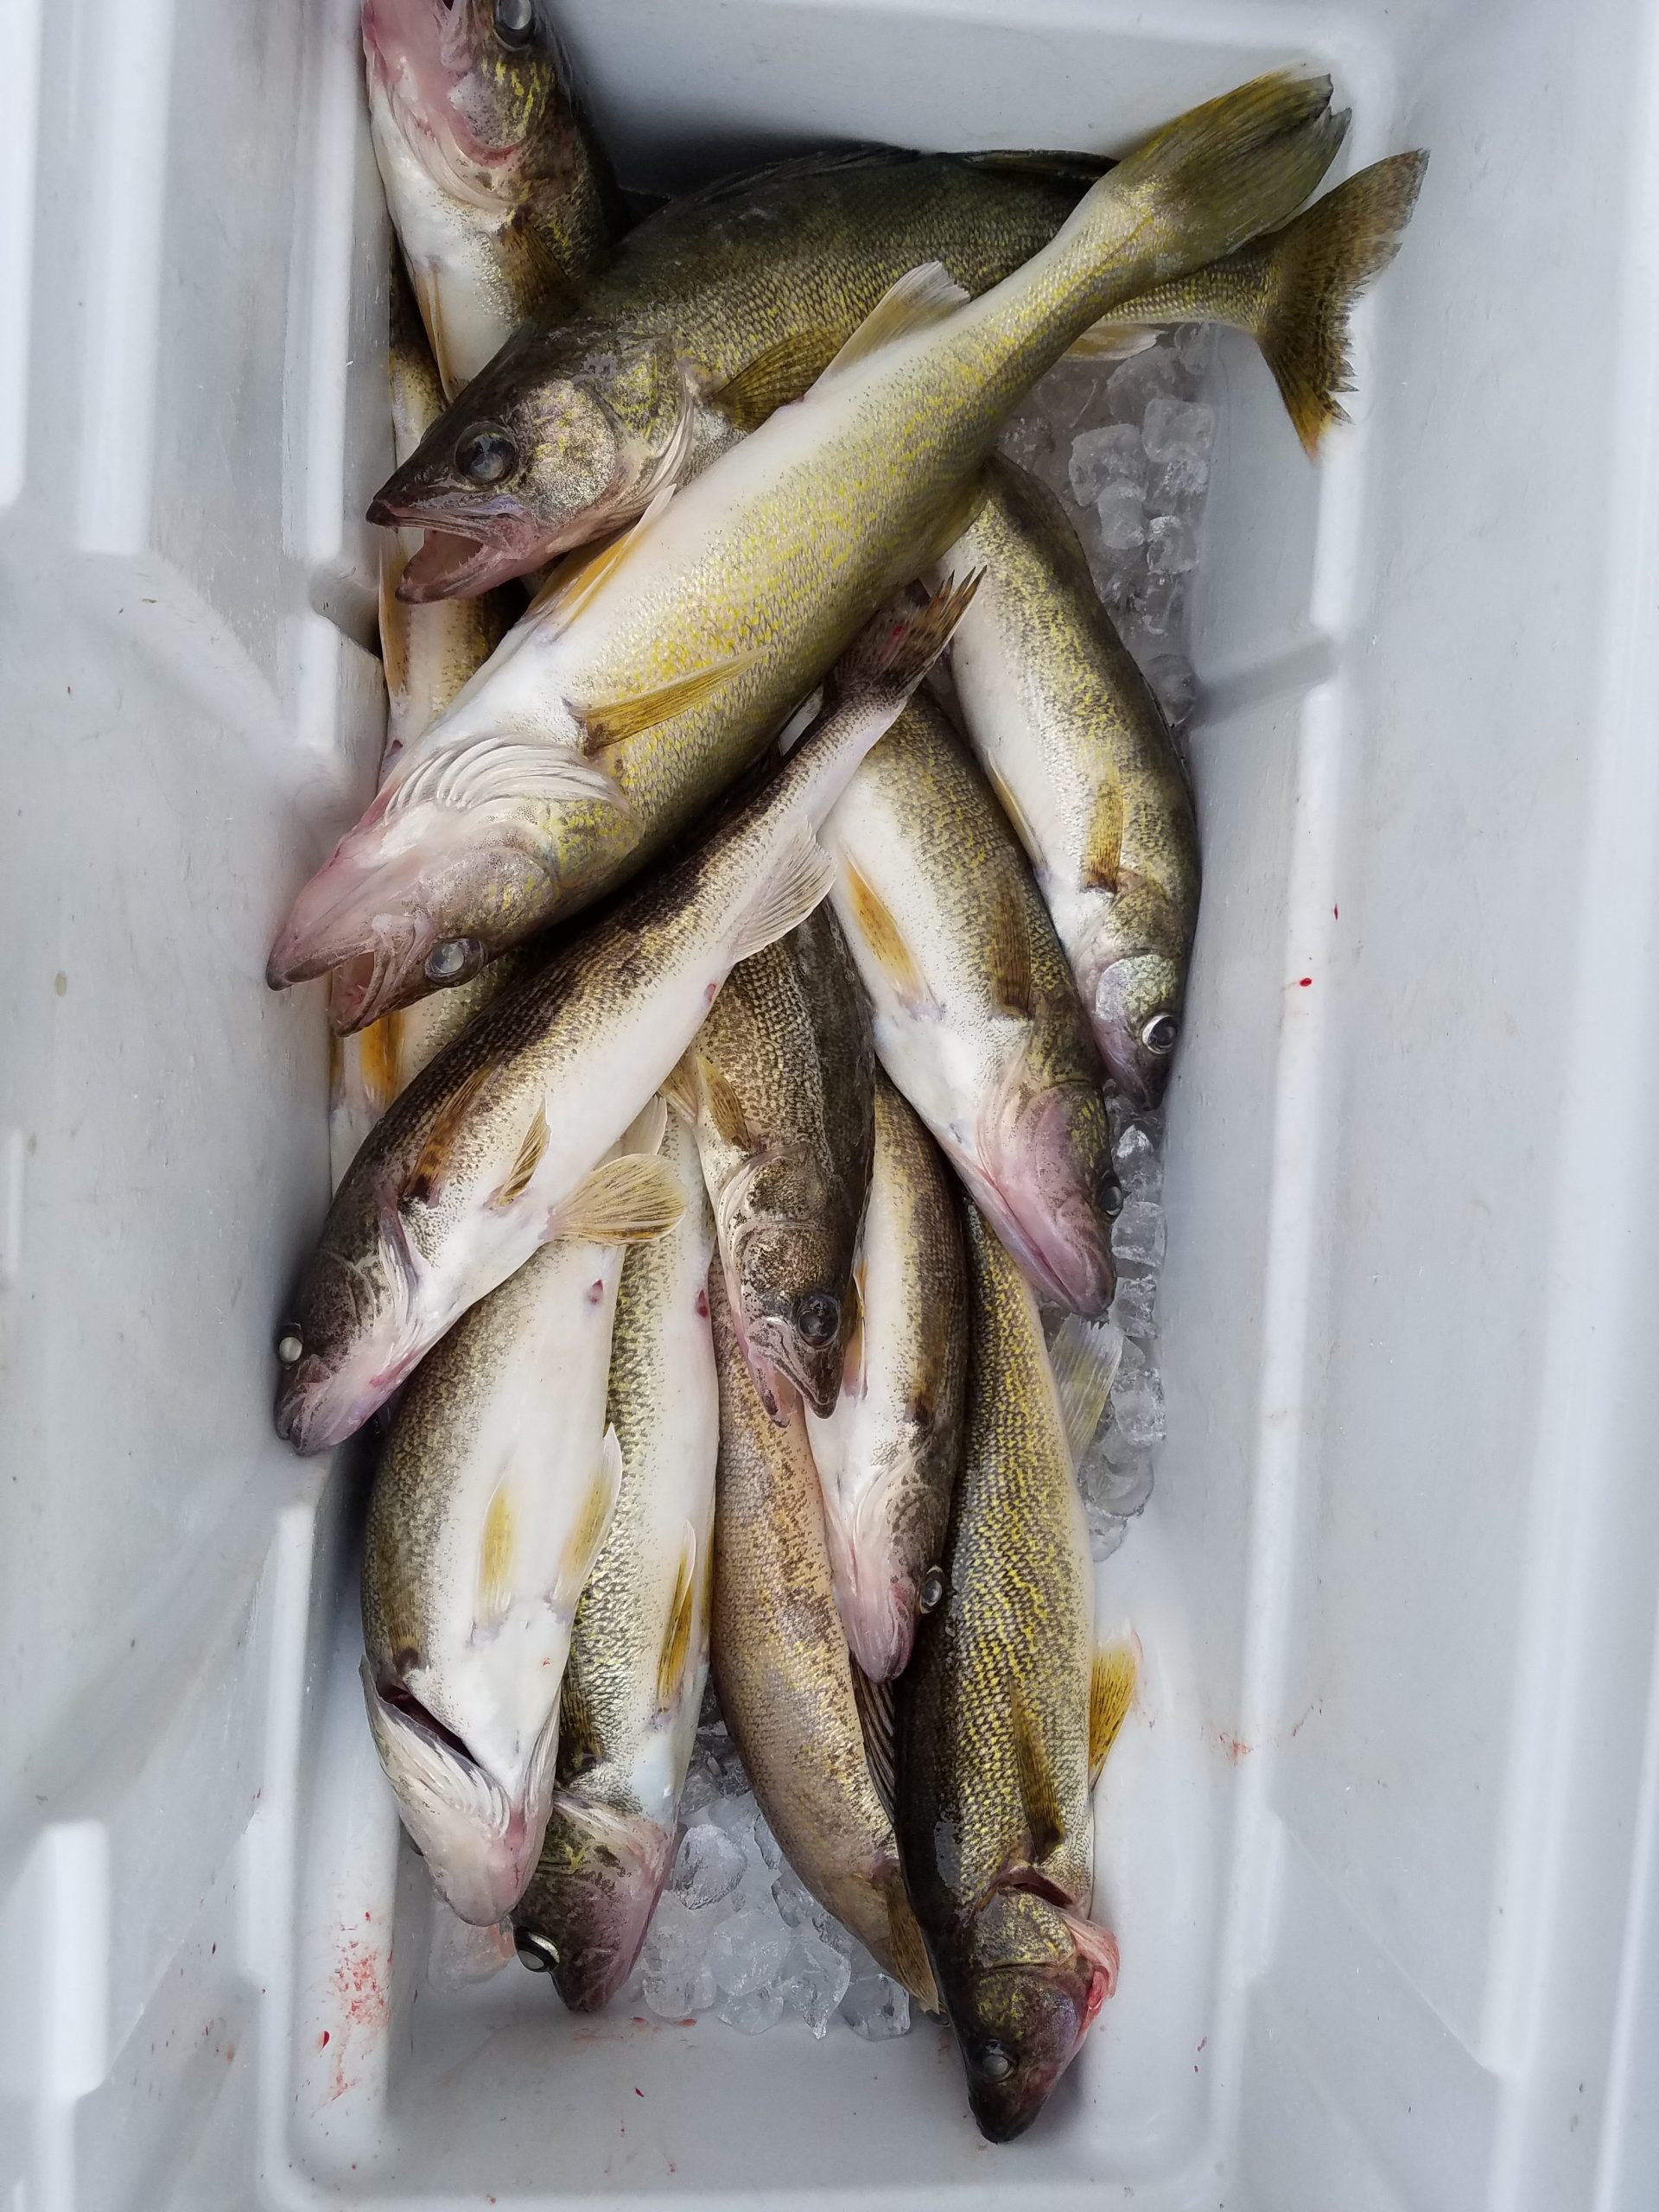 Crawler Harnesses Producing Numbers of Walleyes - Lake of the Woods